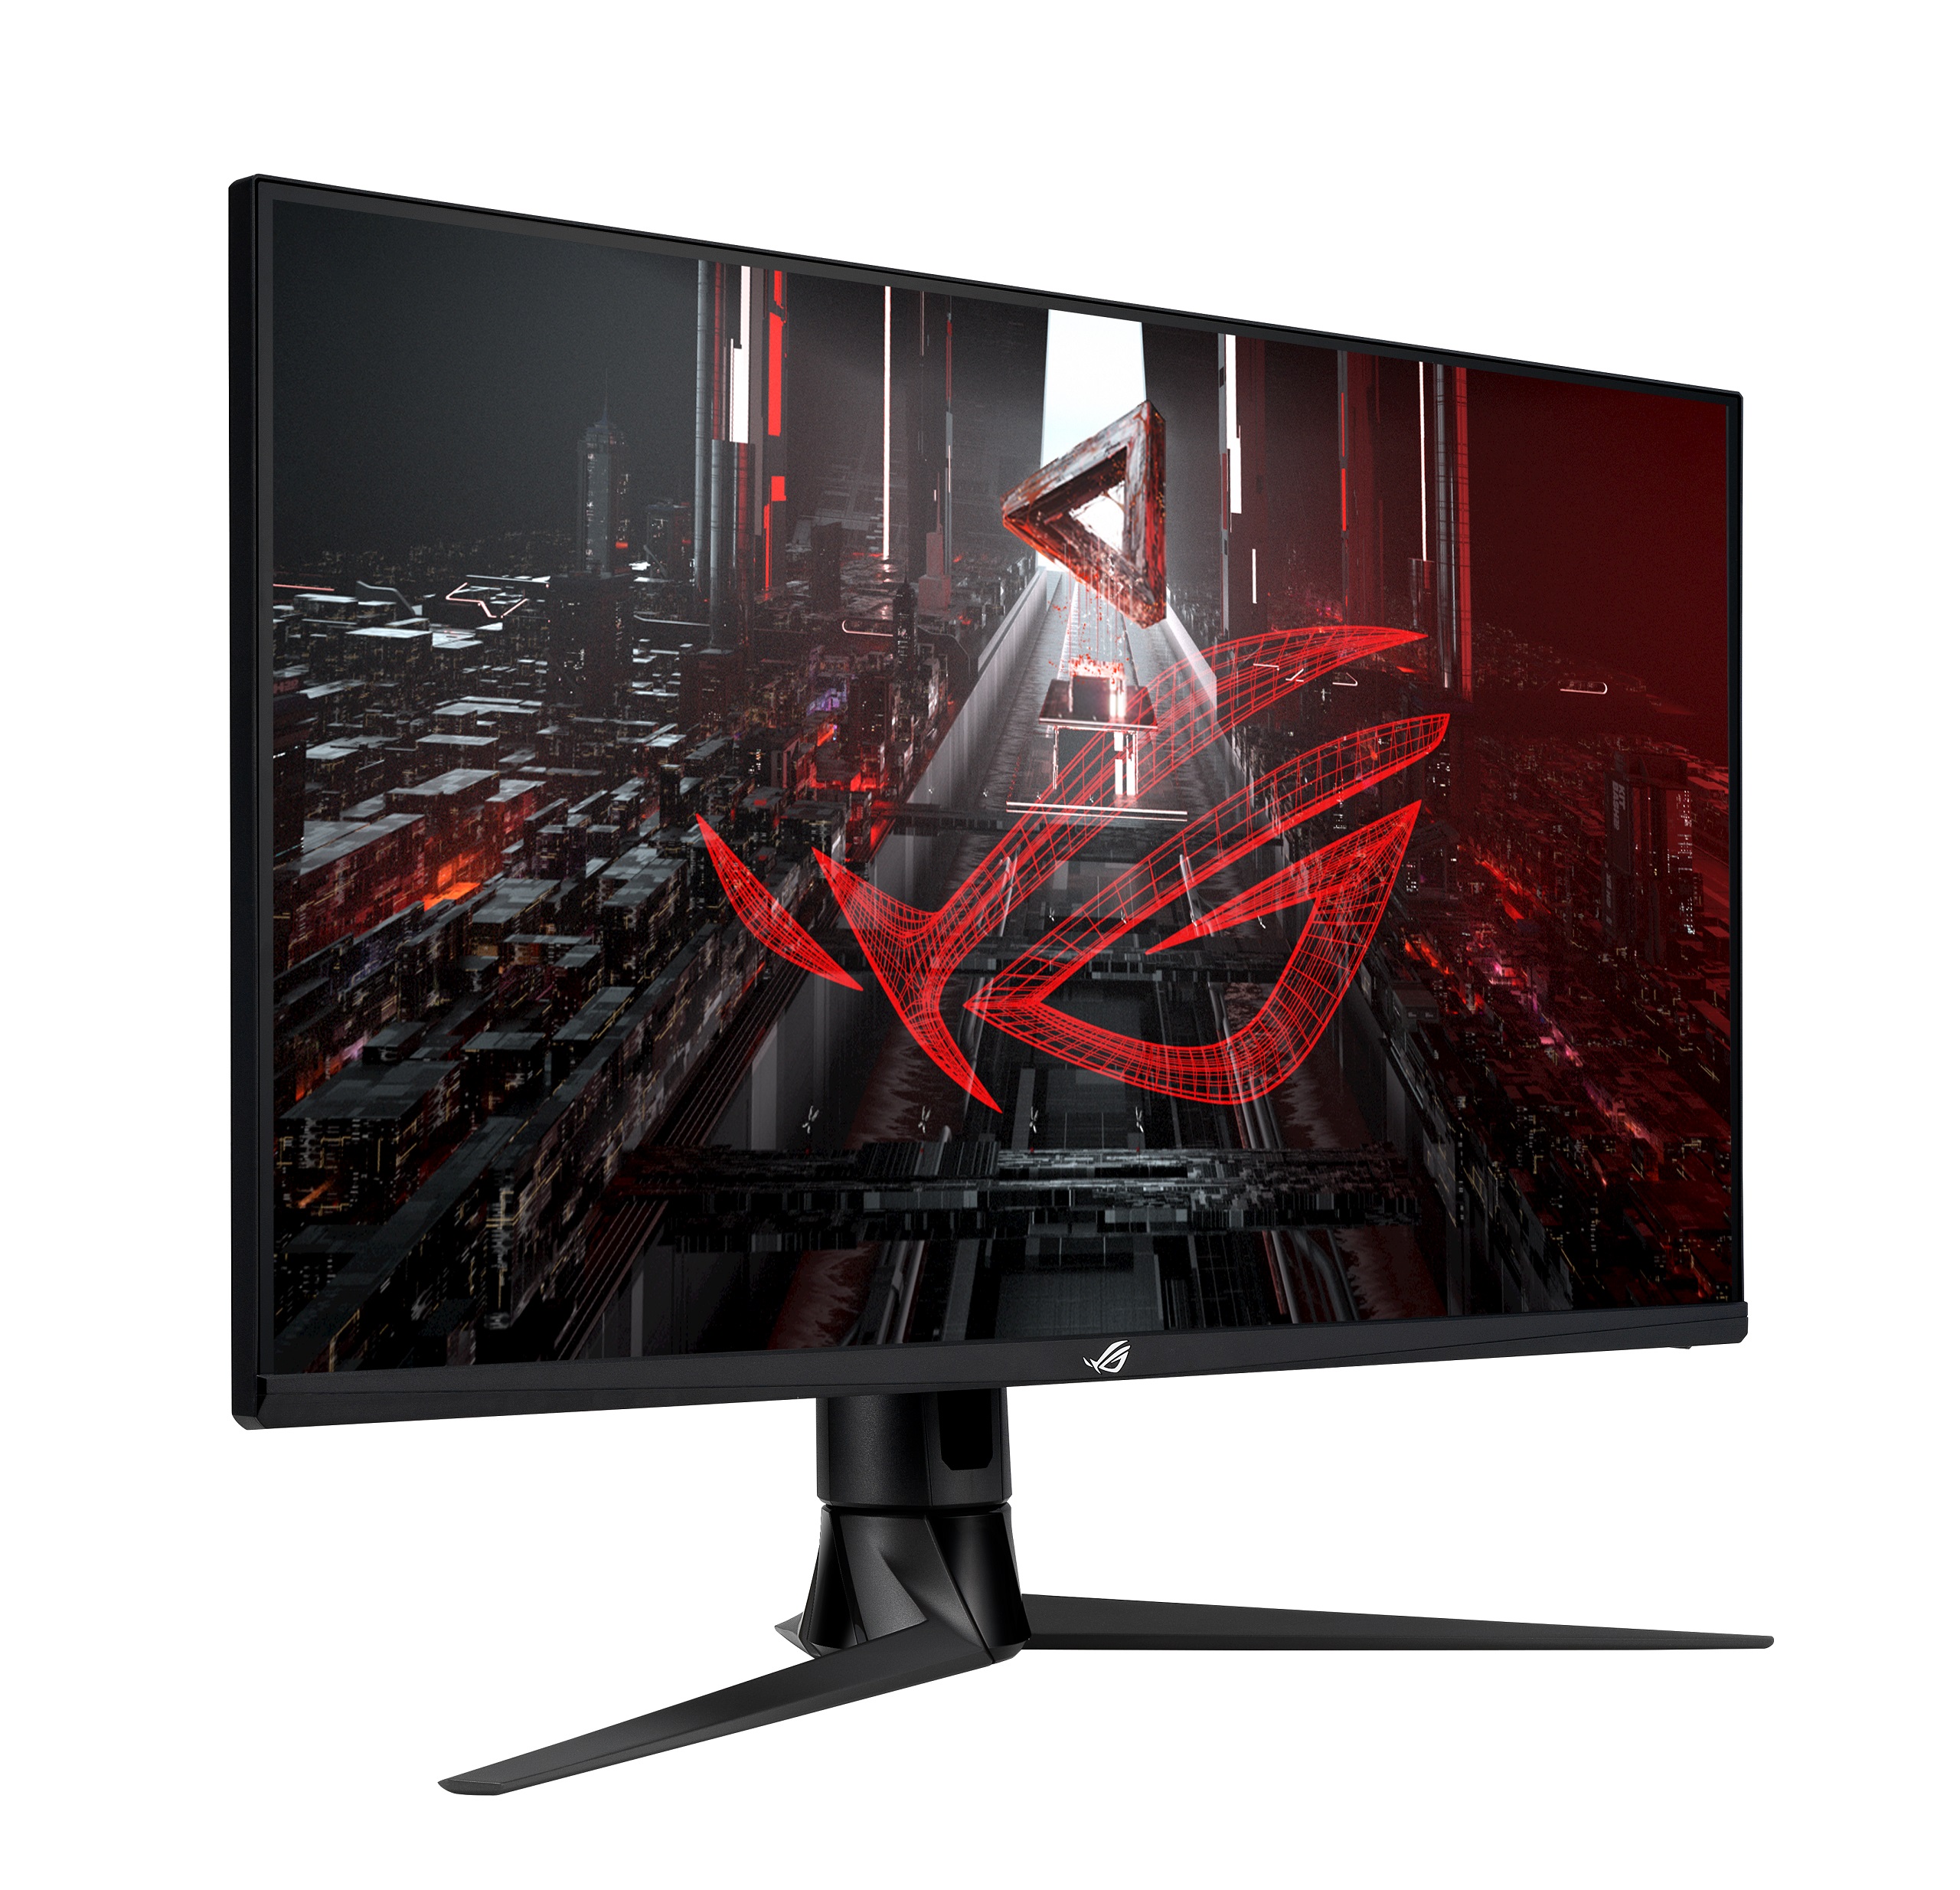 CES 2021: ASUS unveils HDMI 2.1 4K monitor and new peripherals